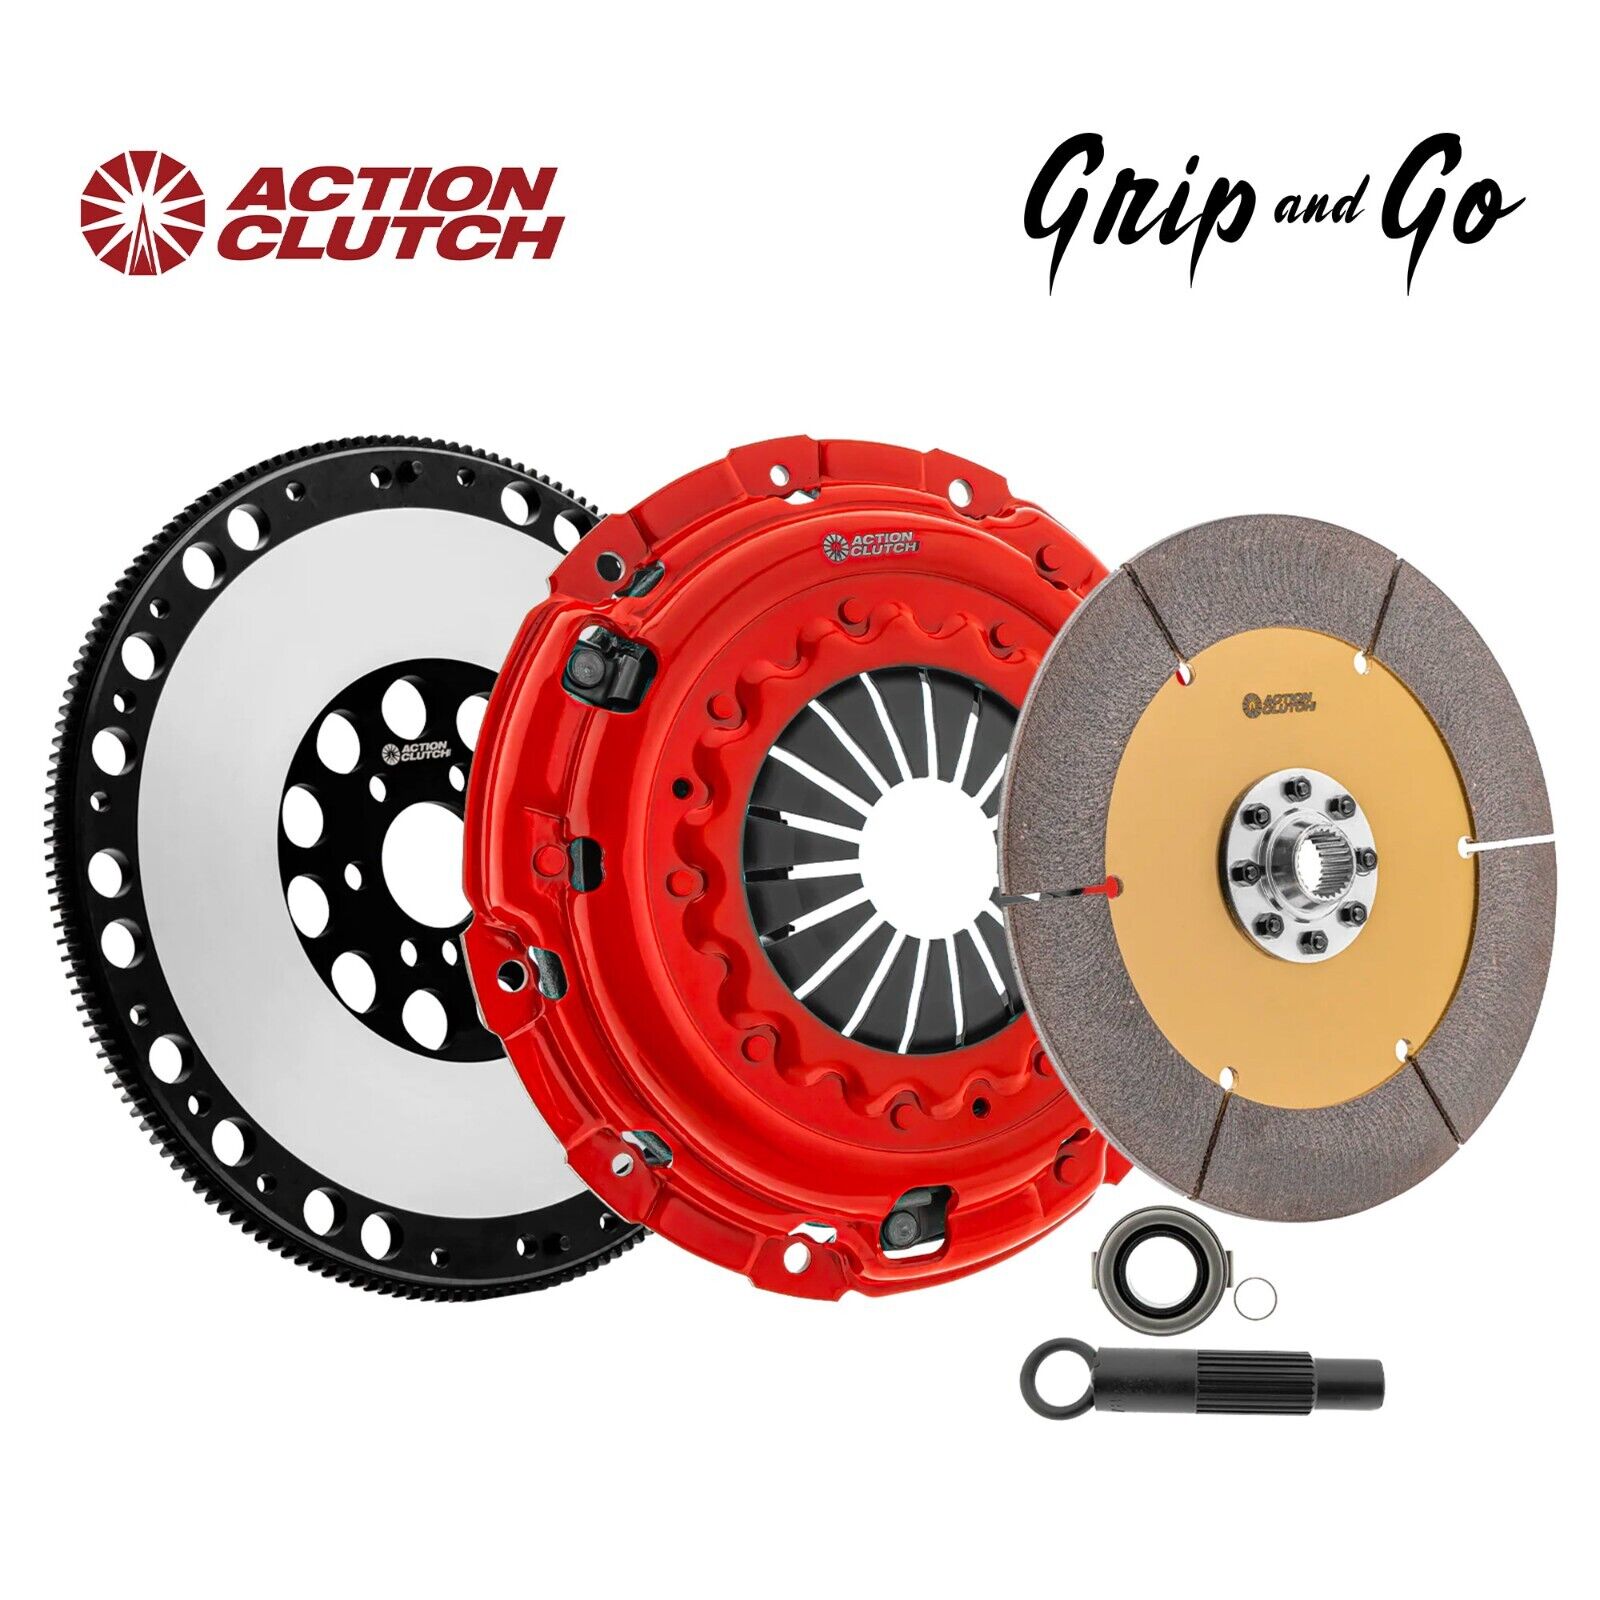 AC Ironman Unsprung Clutch Kit Flywheel For BMW 328i 99-00 2.8L DOHC 4 Door Only